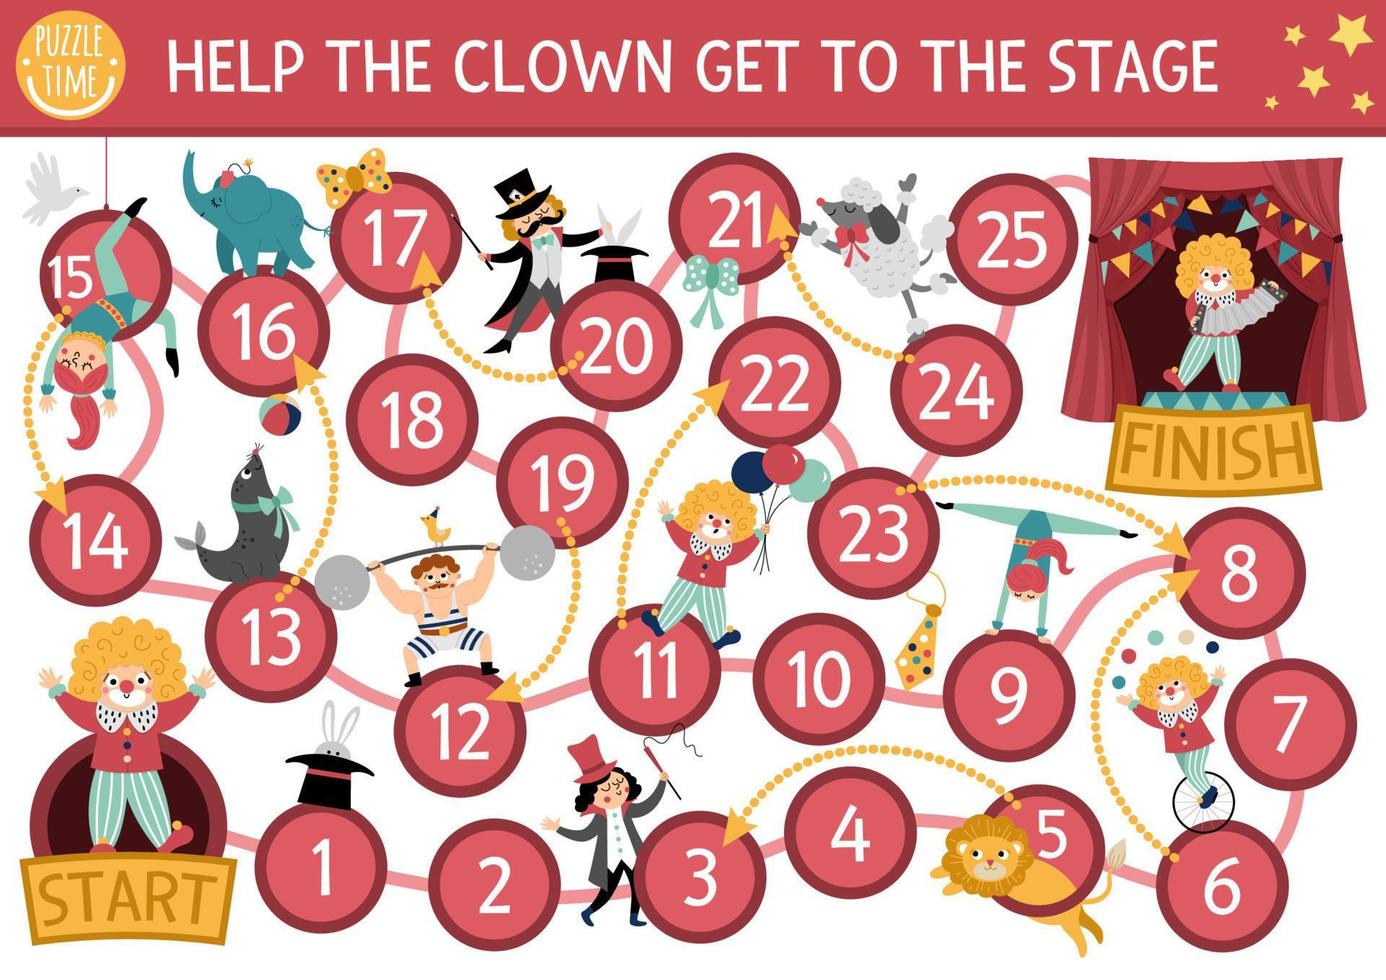 Circus dice board game for children with clown going to stage. Amusement show or holiday boardgame. Entertainment festival activity or printable worksheet with magician, athlete, gymnast, animals vector